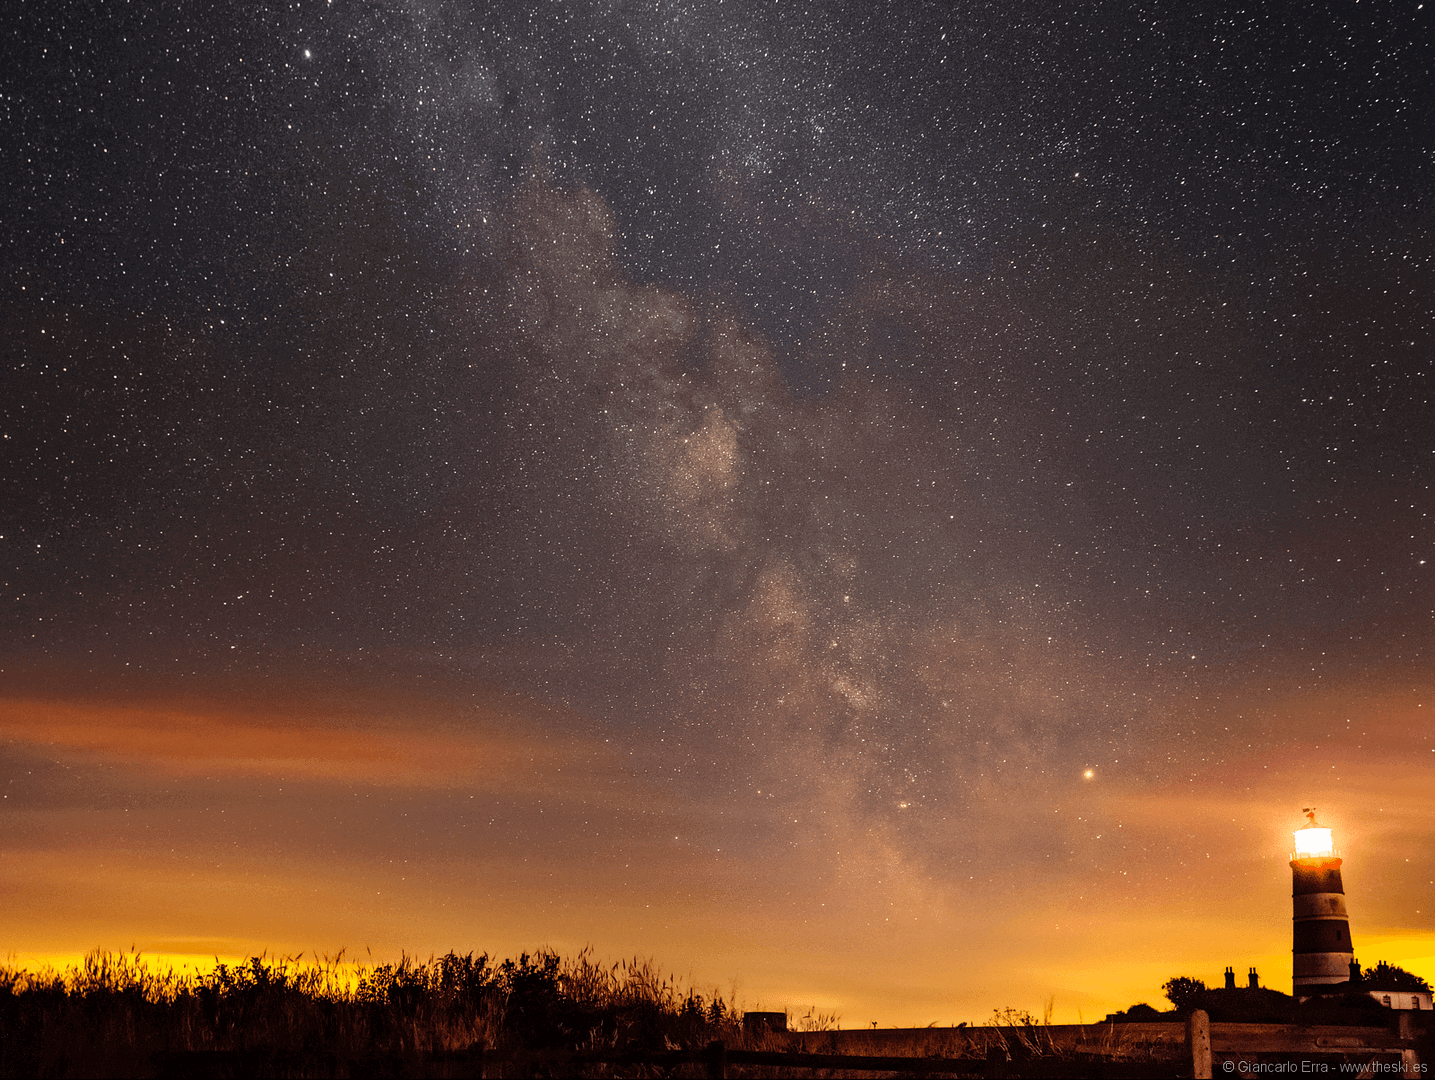 The Skies Astrophotography by Giancarlo Erra MG 6343 composite PS PS geomcorr